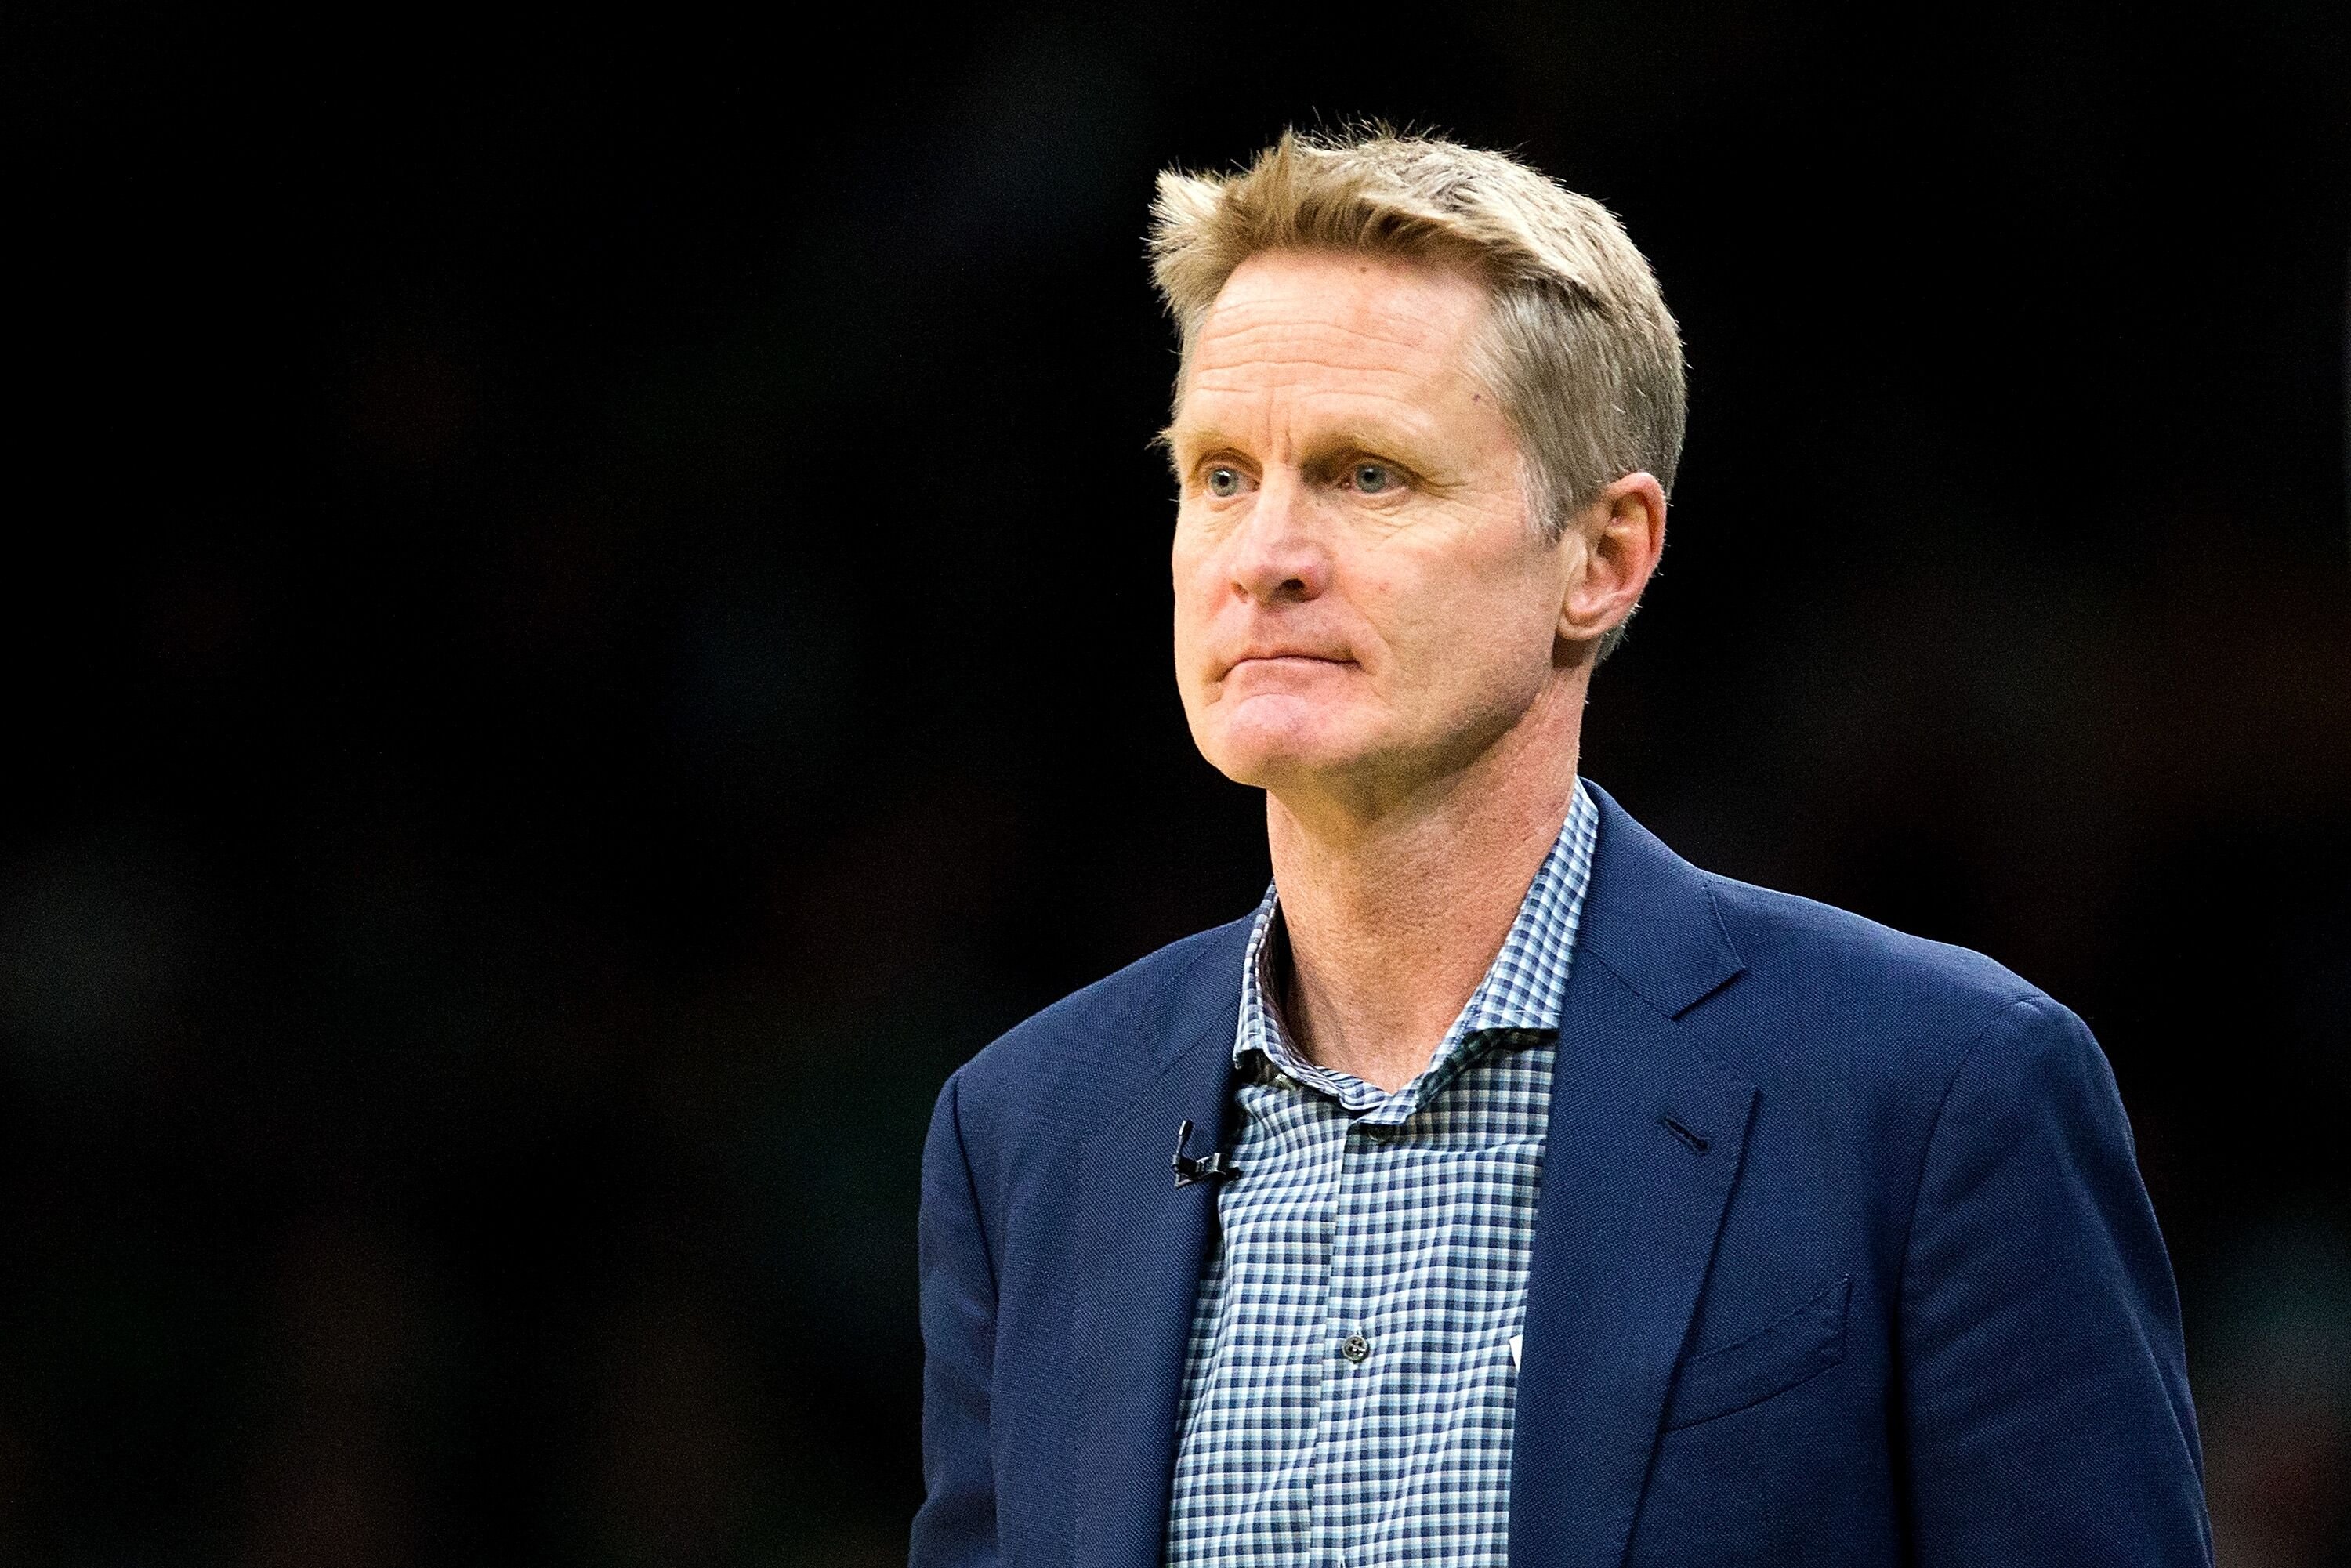 Steve Kerr of the Golden State Warriors at a game against the Boston Celtics in 2019 in Boston | Source: Getty Images